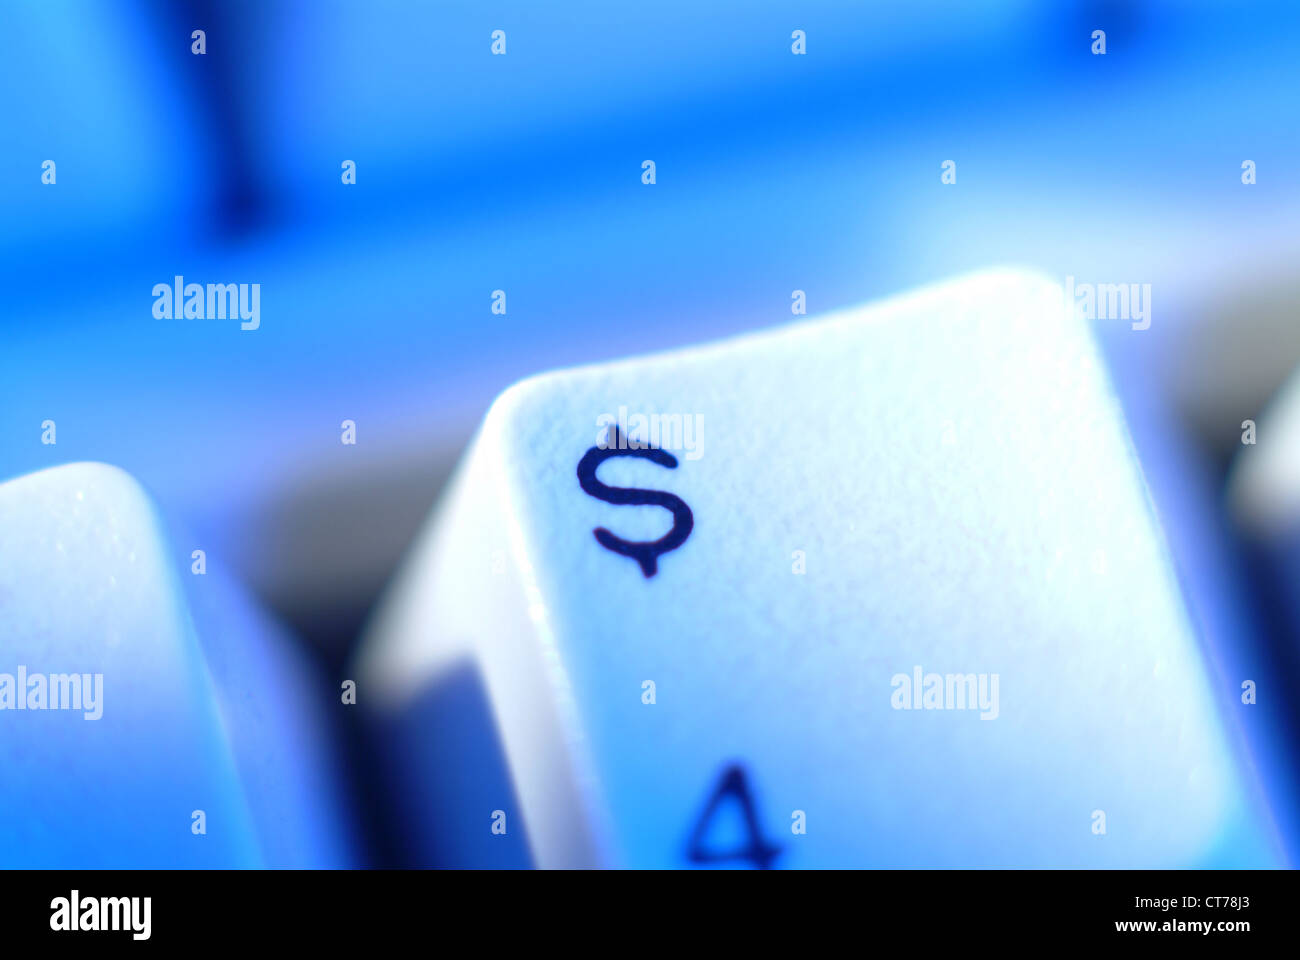 Key on a keyboard with a dollar sign Stock Photo